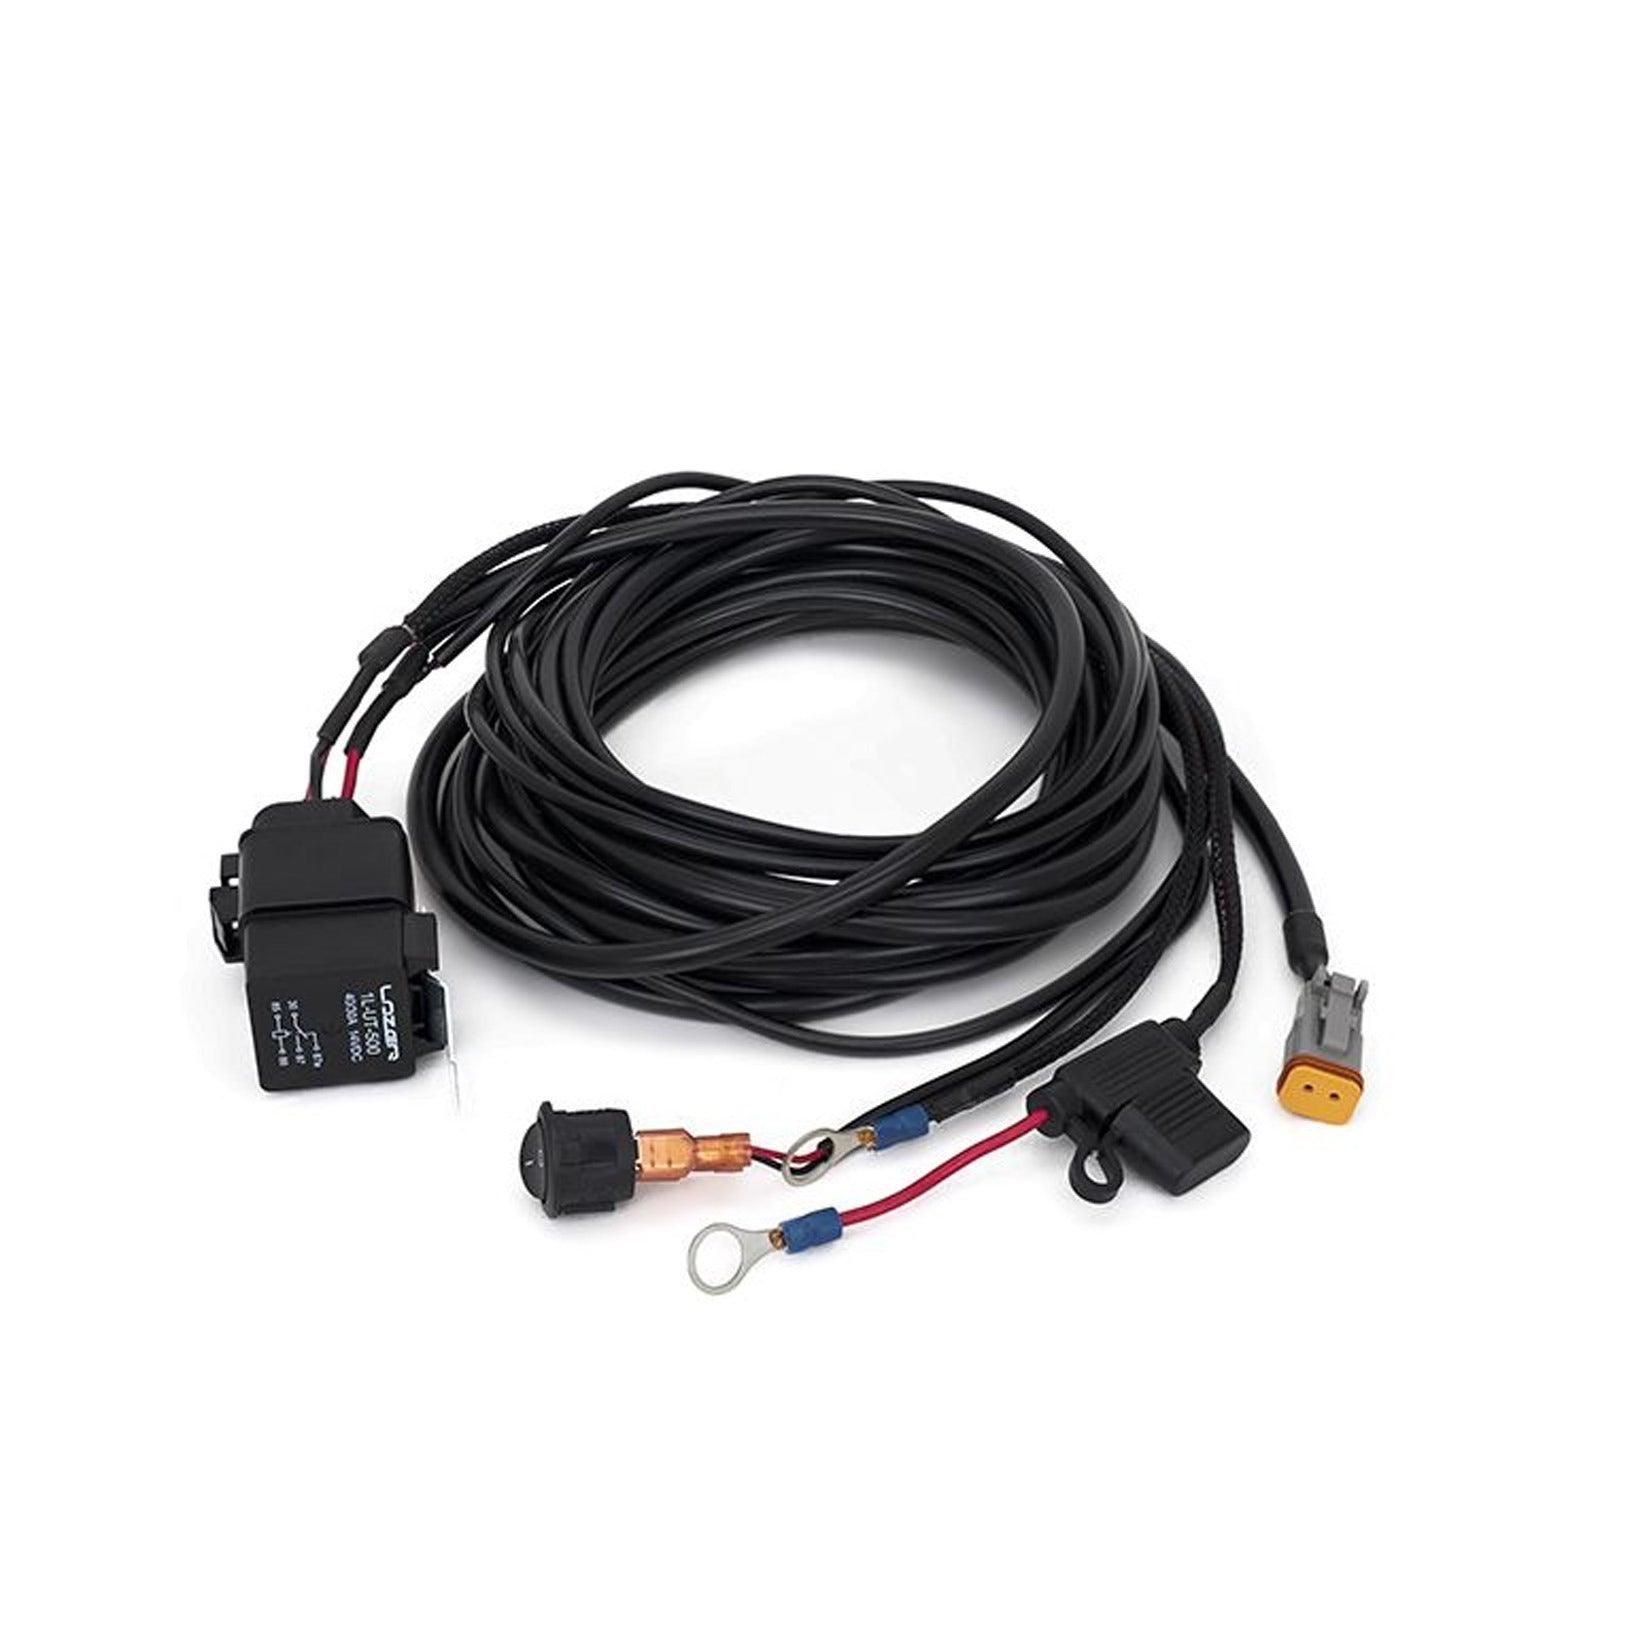 LAZER LIGHTS - WIRING KIT - SINGLE LAMP - WITH SWITCH - UTILITY SERIES - Storm Xccessories2